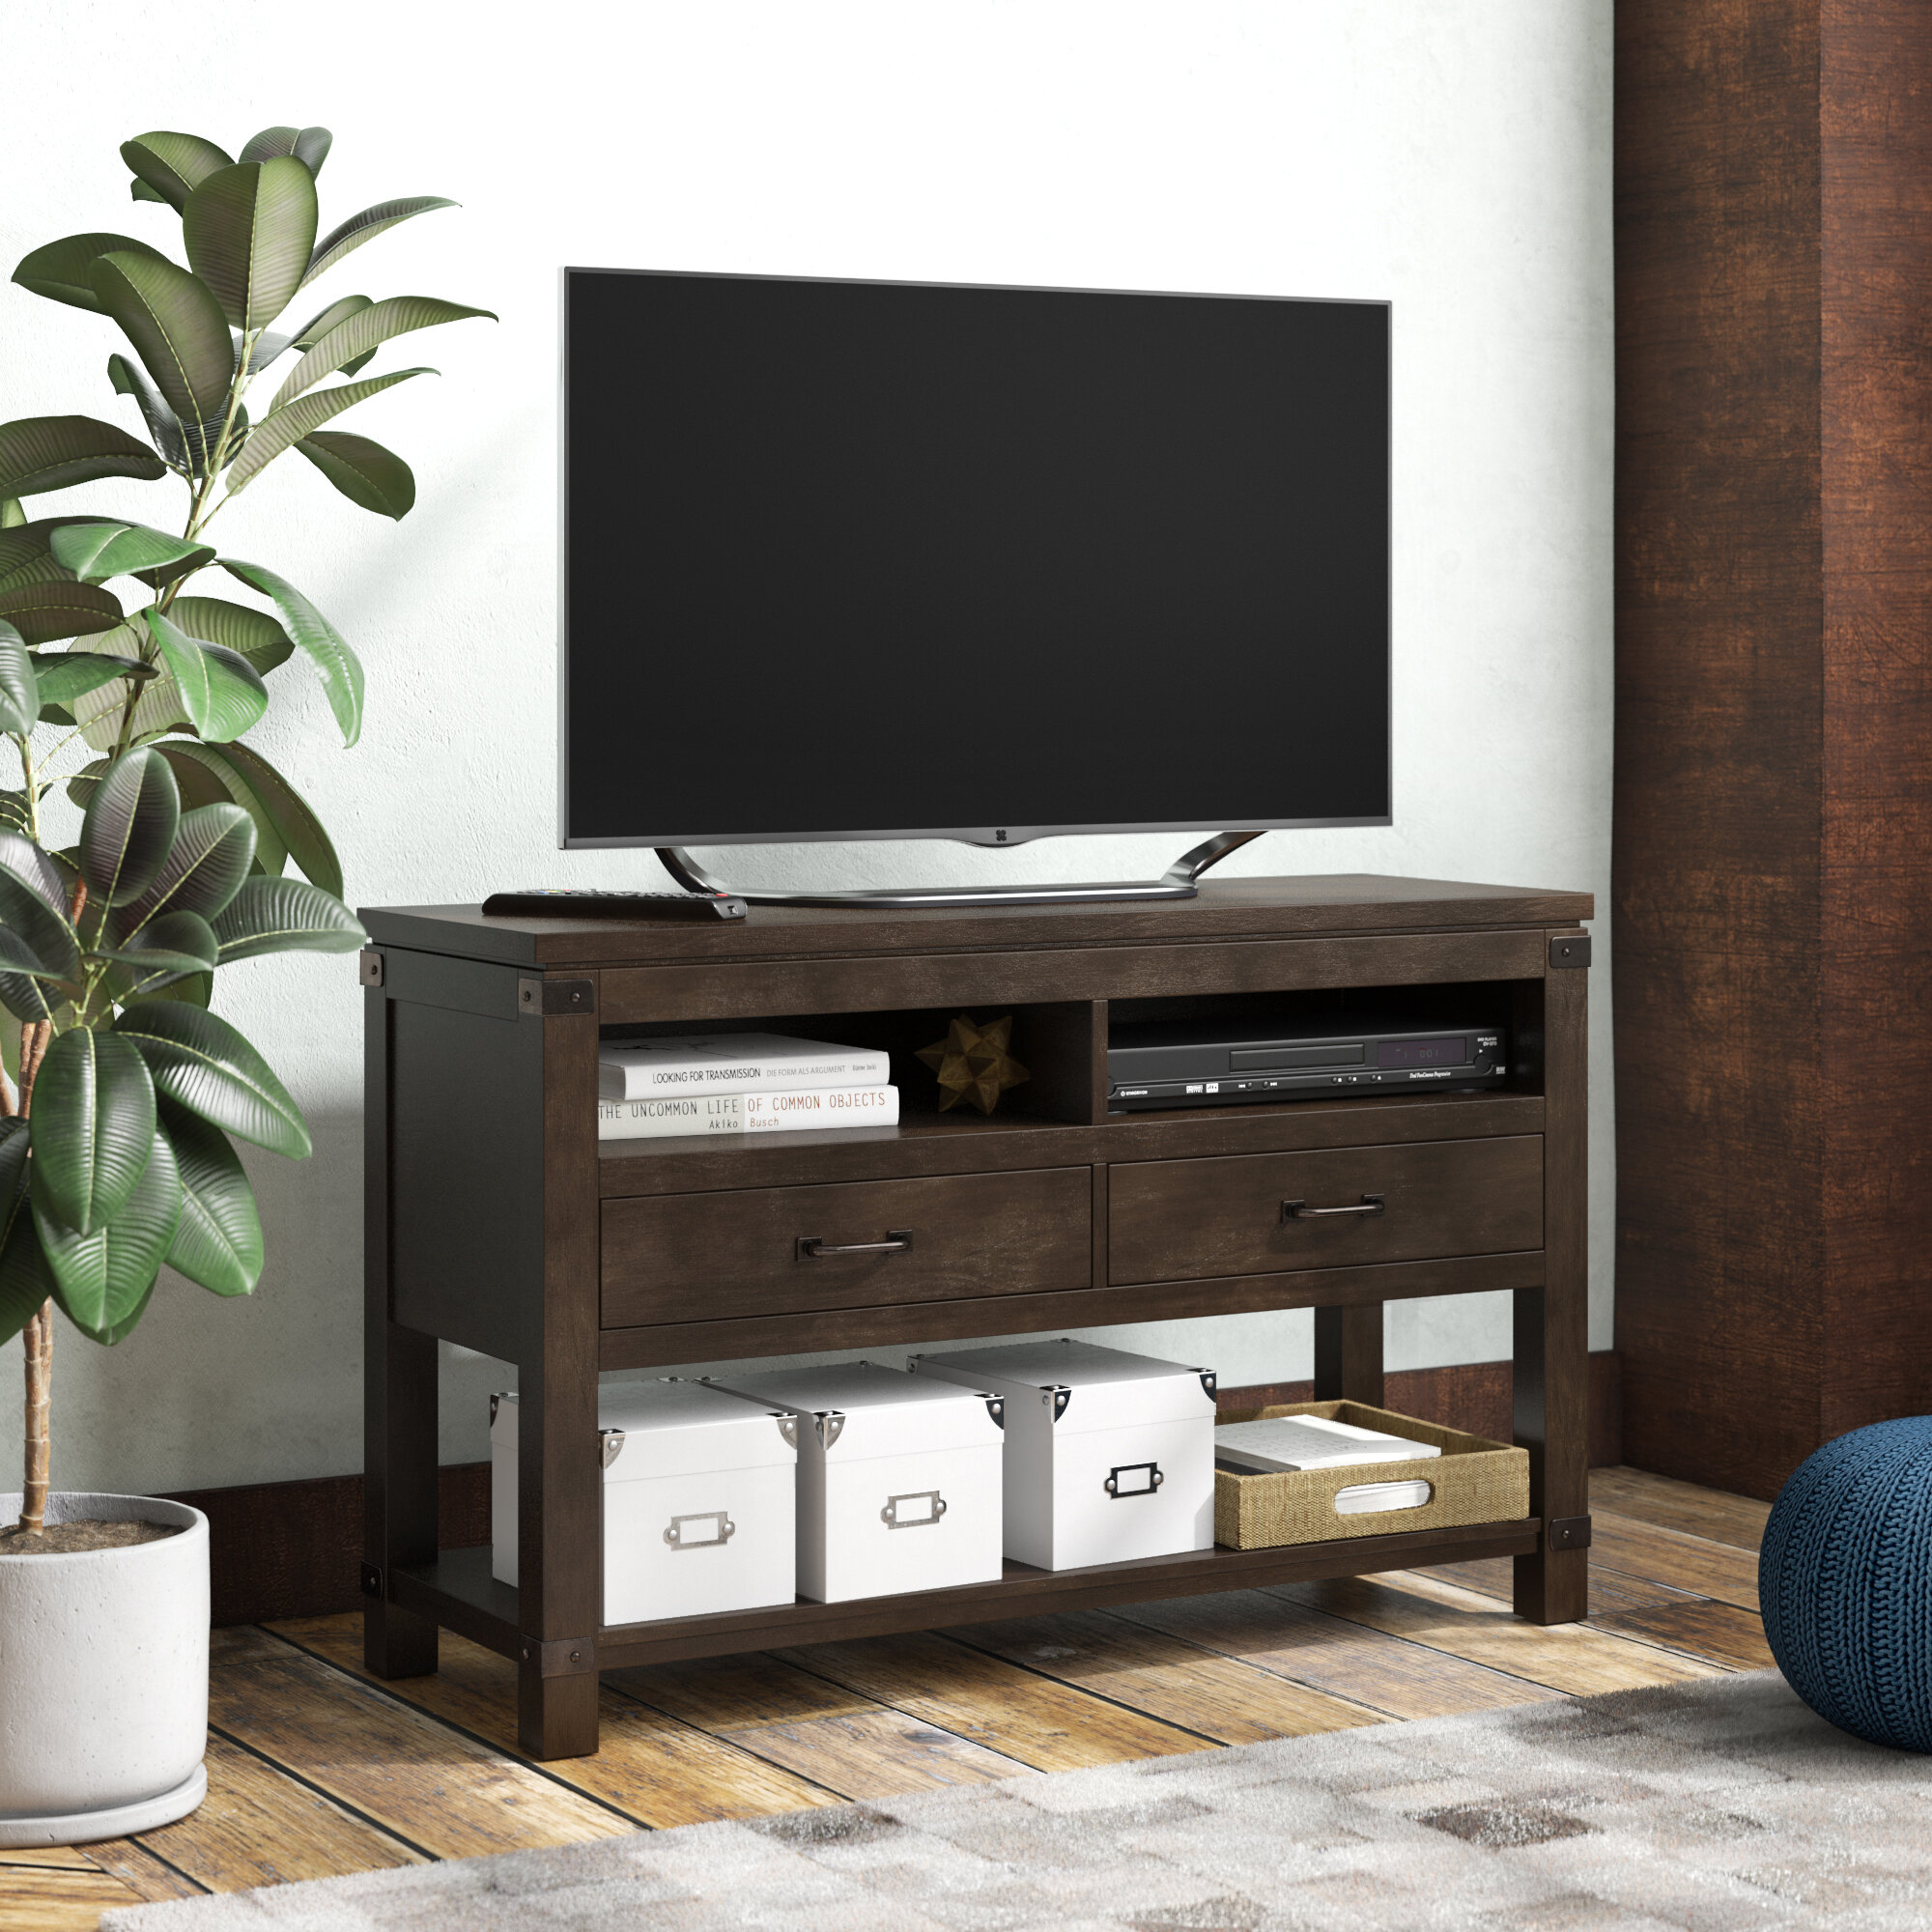 Trent Austin Design El Monte Tv Stand For Tvs Up To 55 Reviews